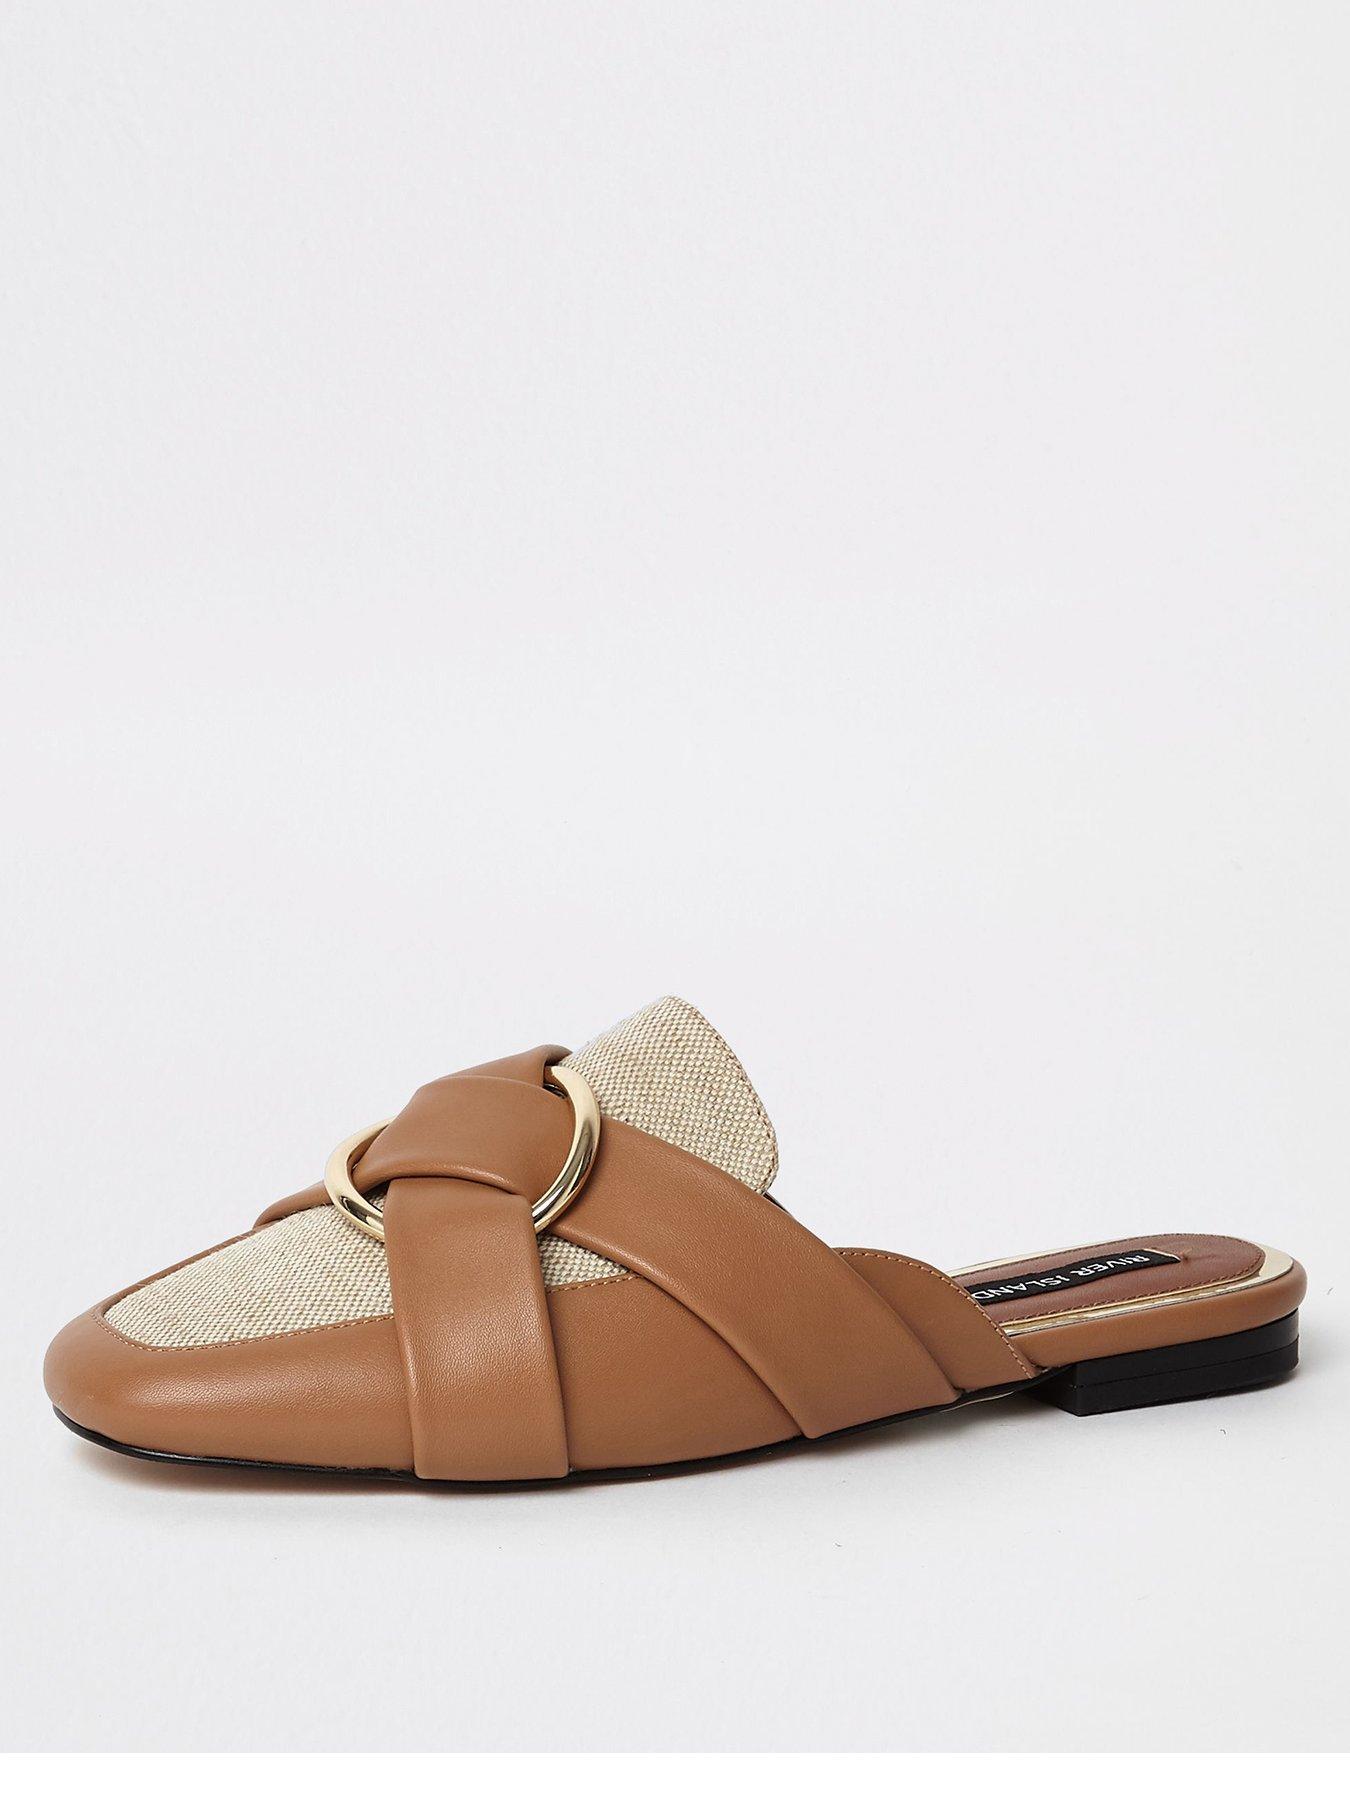 river-island-backless-loafer-tan